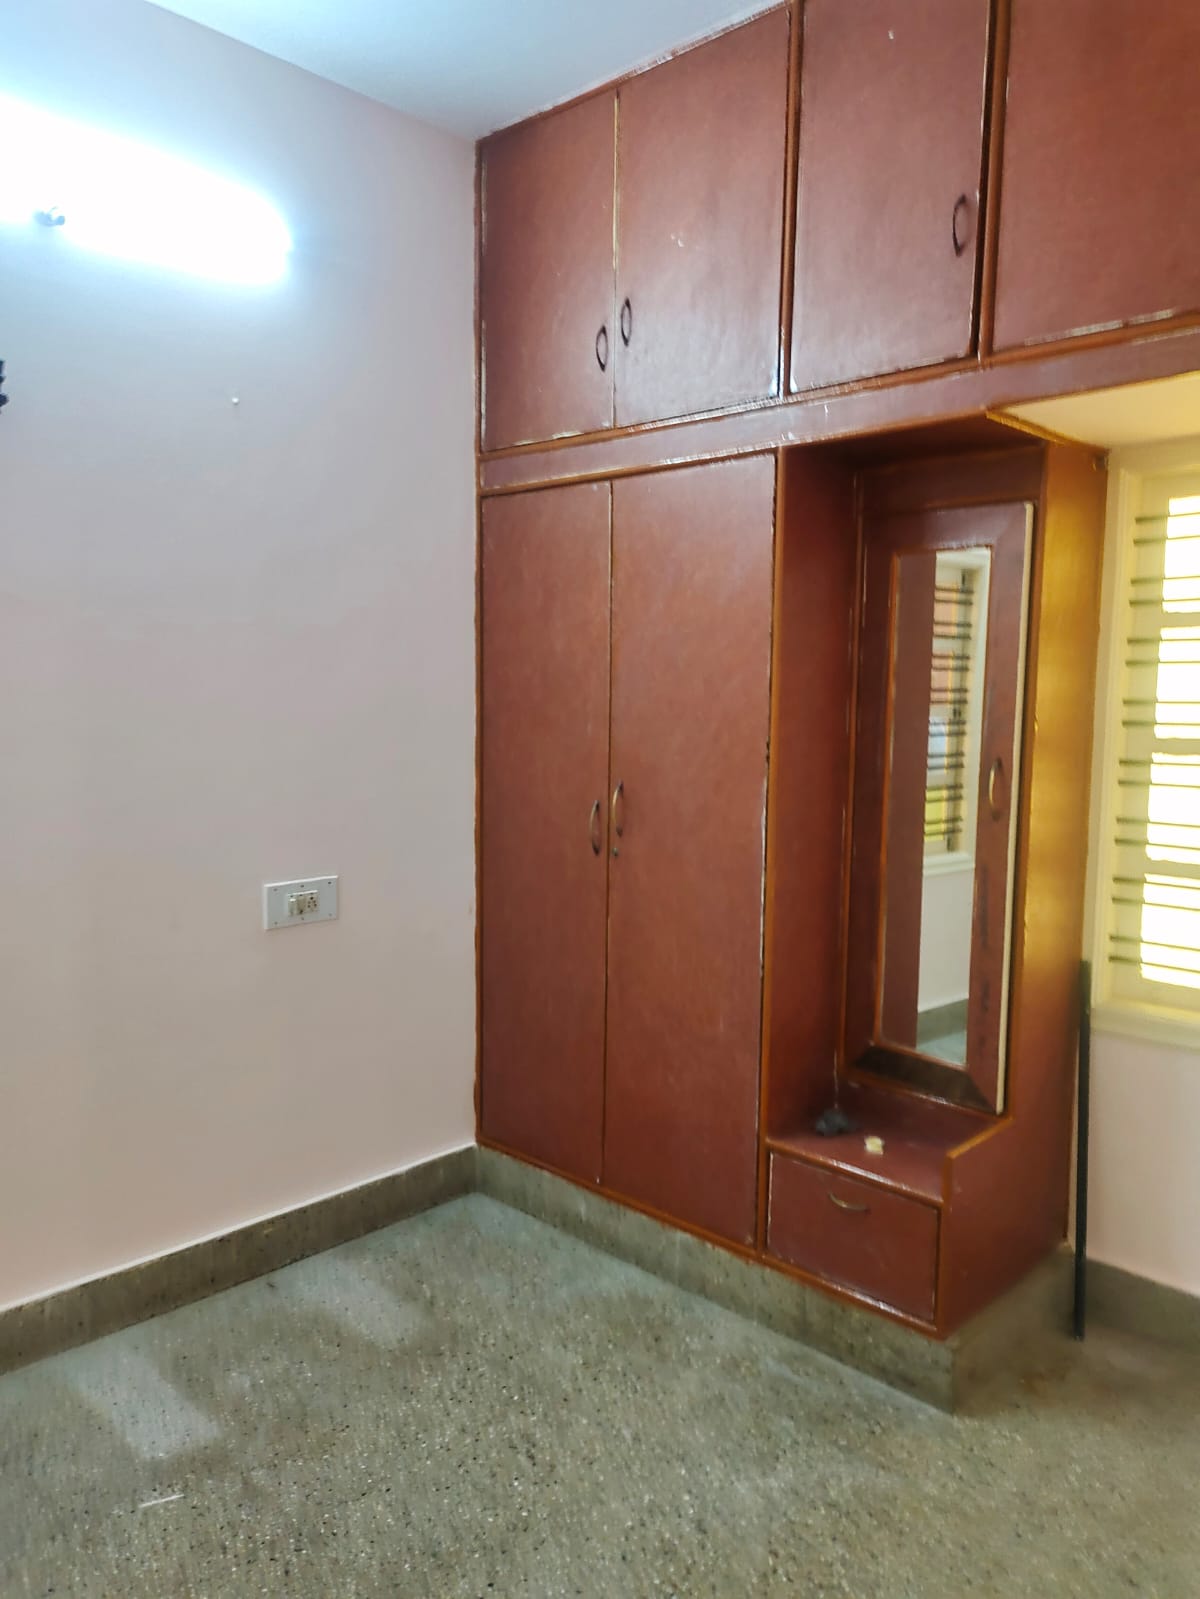 1 BHK Residential Apartment for Lease Only at JAML2 - 2272 in Aavalahalli